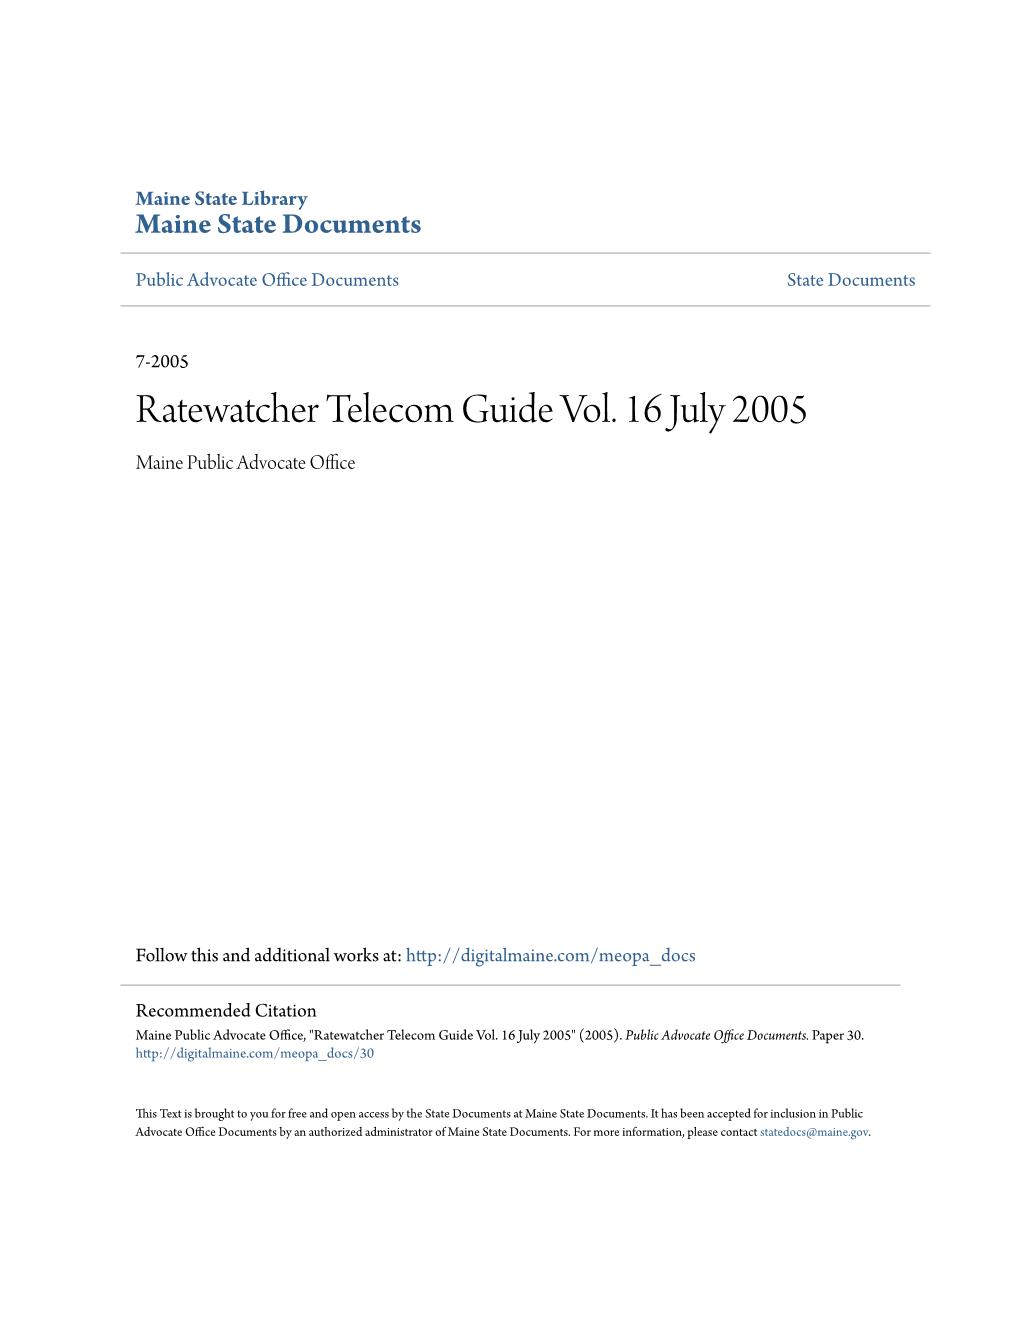 Ratewatcher Telecom Guide Vol. 16 July 2005 Maine Public Advocate Office